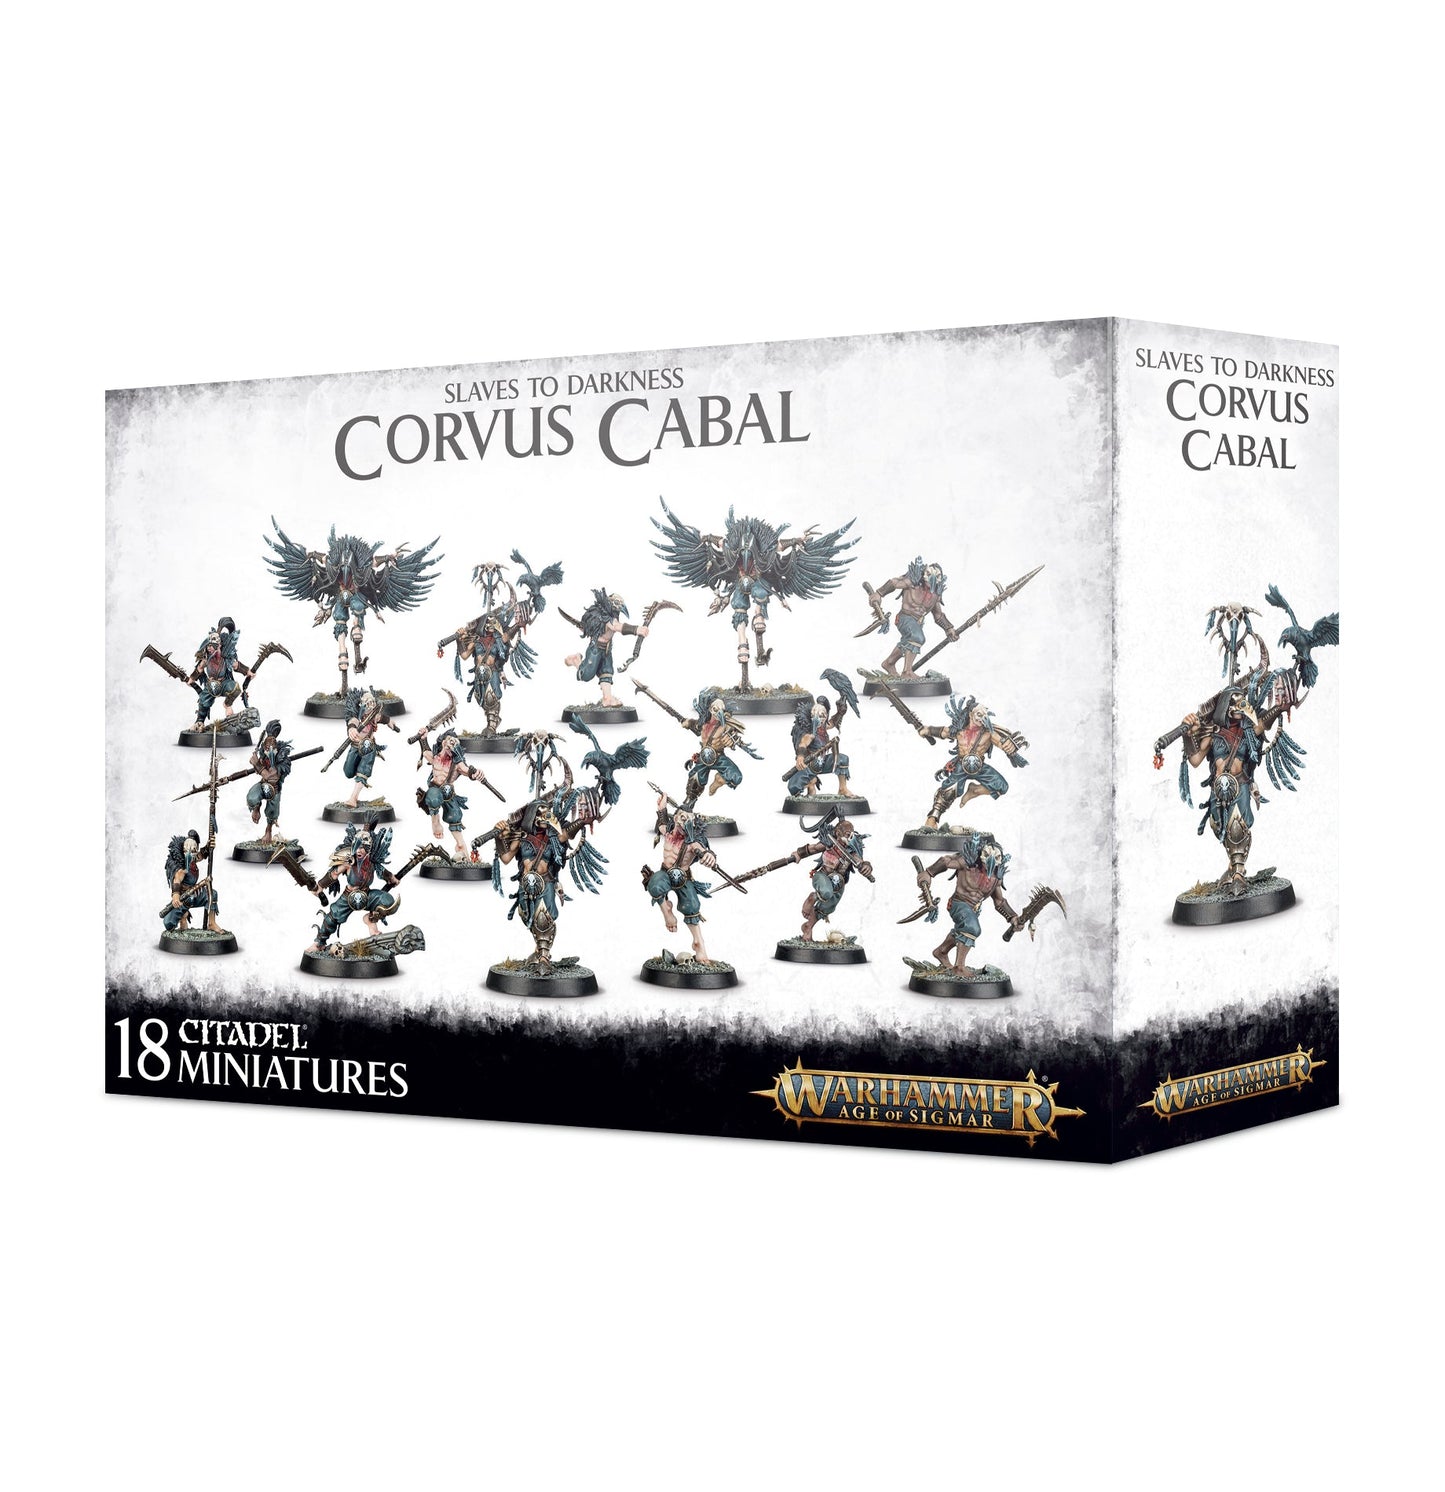 Slaves to Darkness: Corvus Cabal - Gamescape